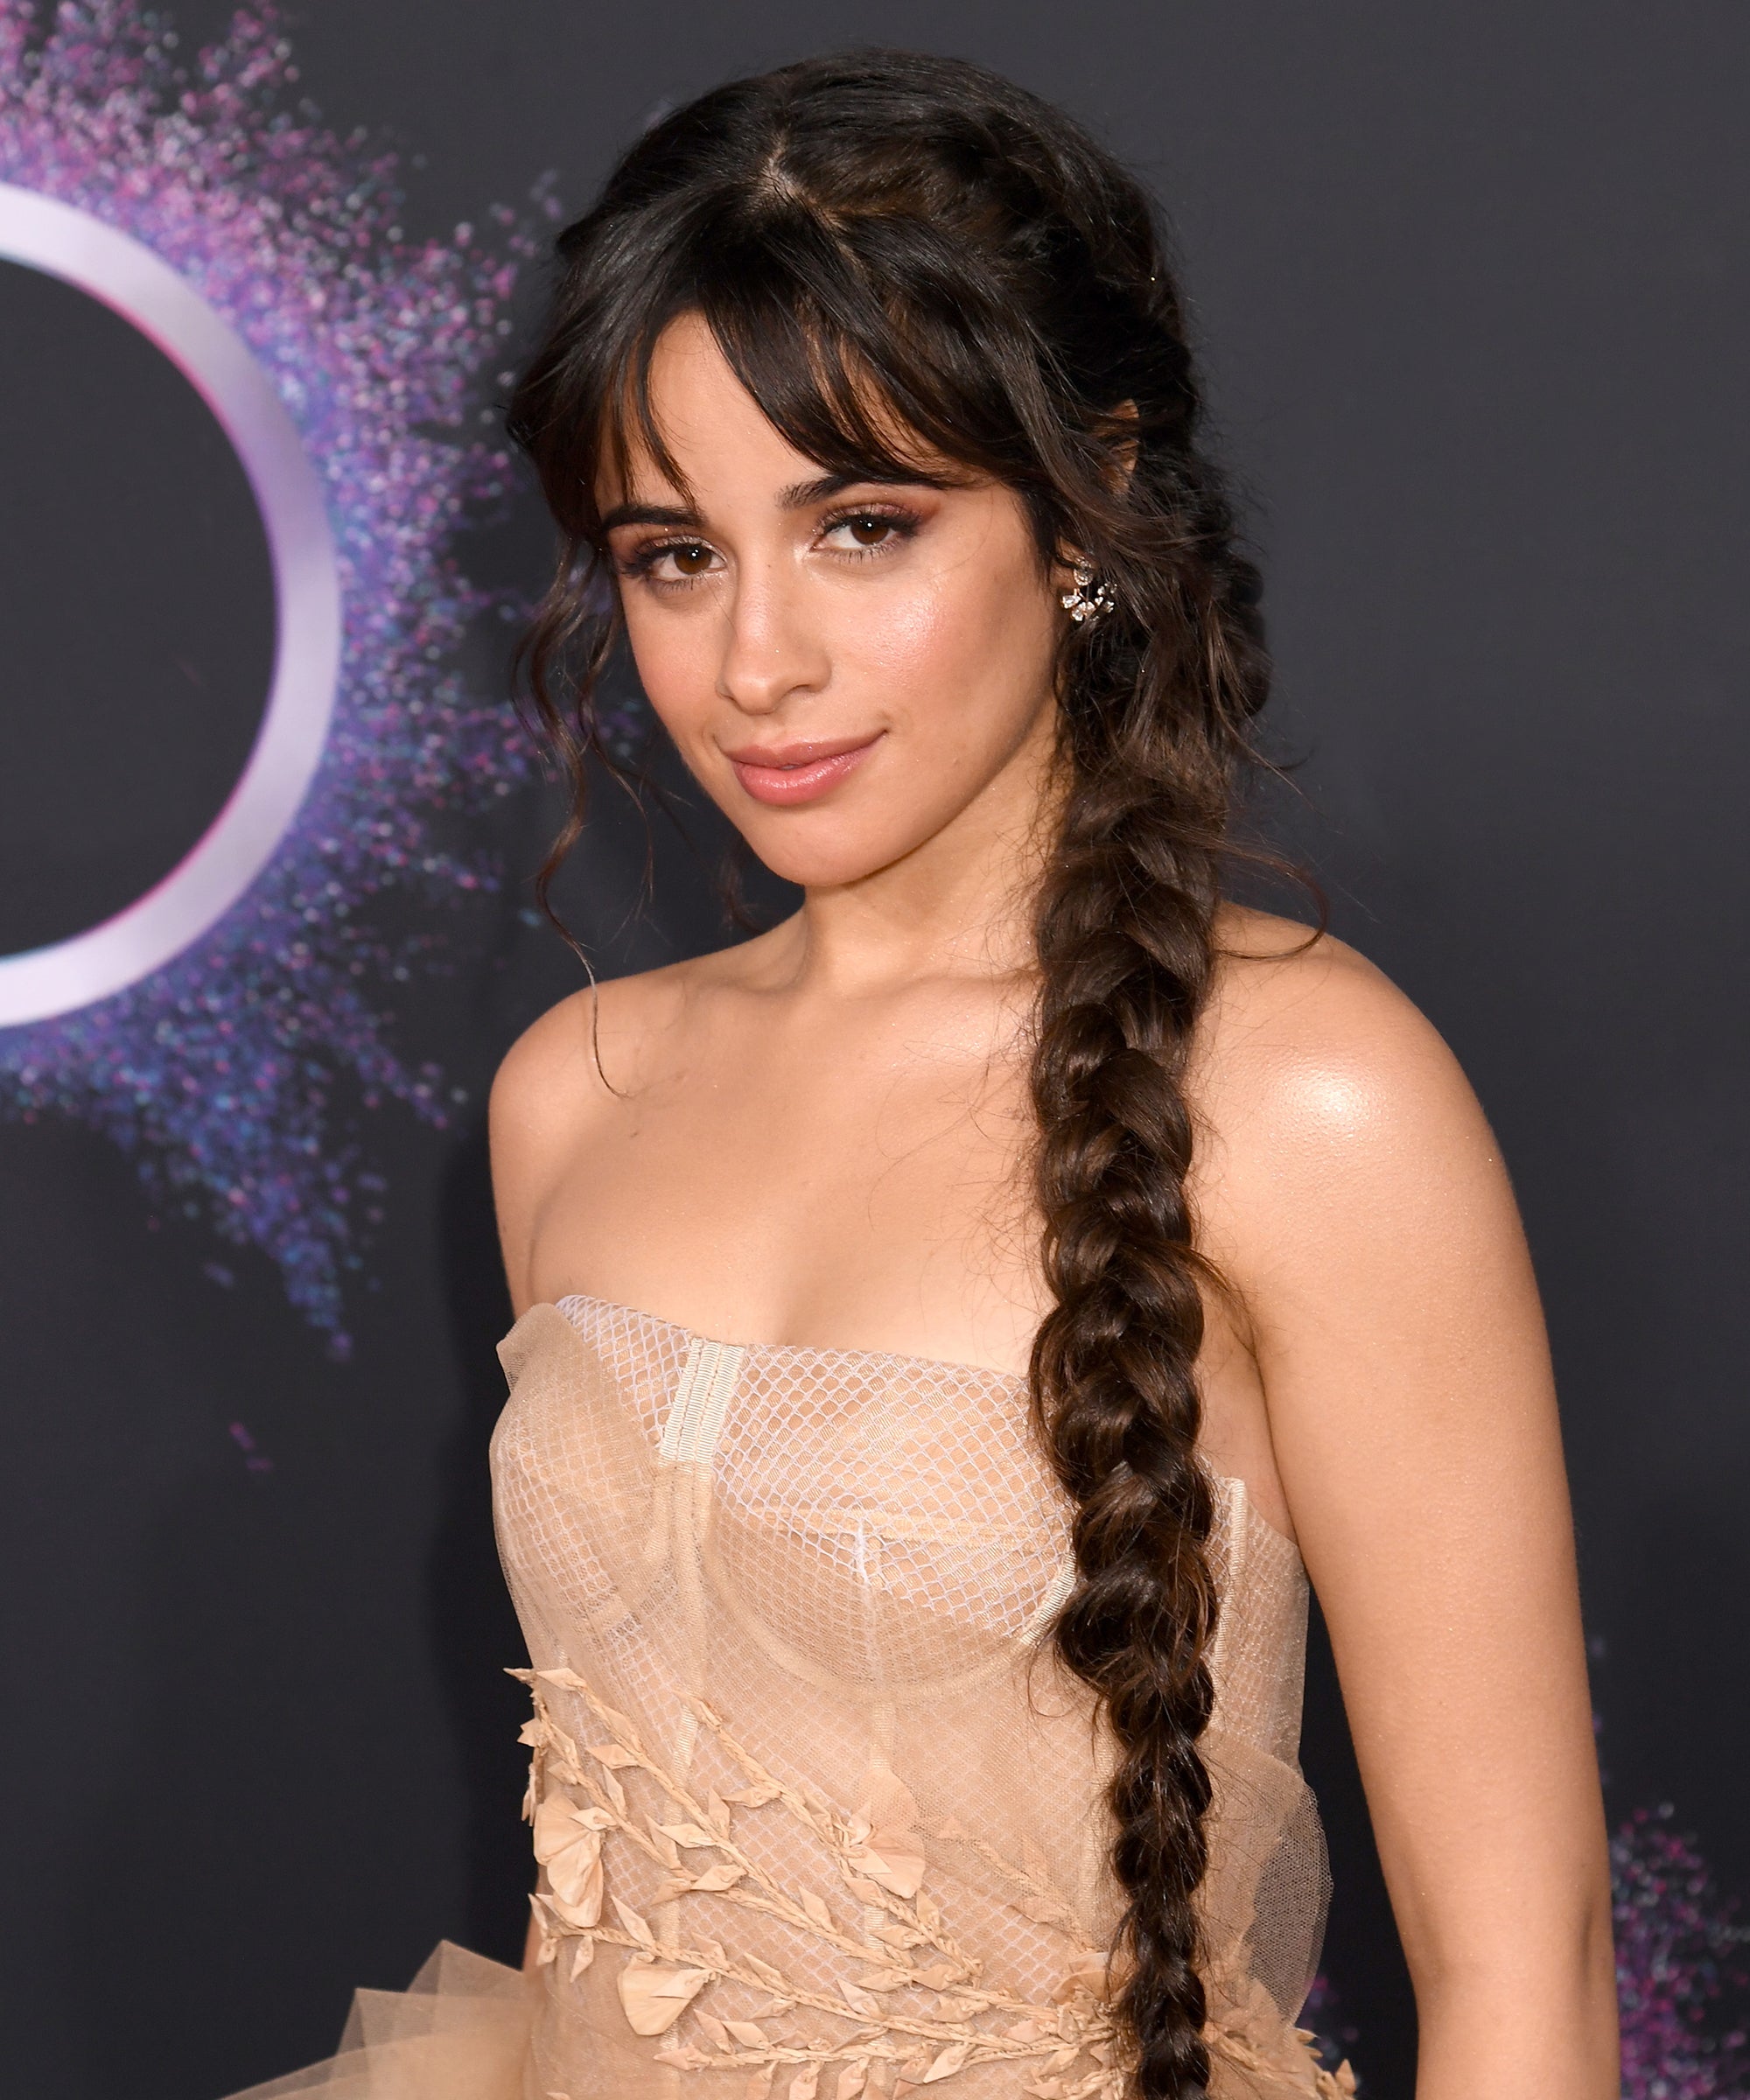 Camila Cabello turns up the heat in pink crop top and sheer black tights